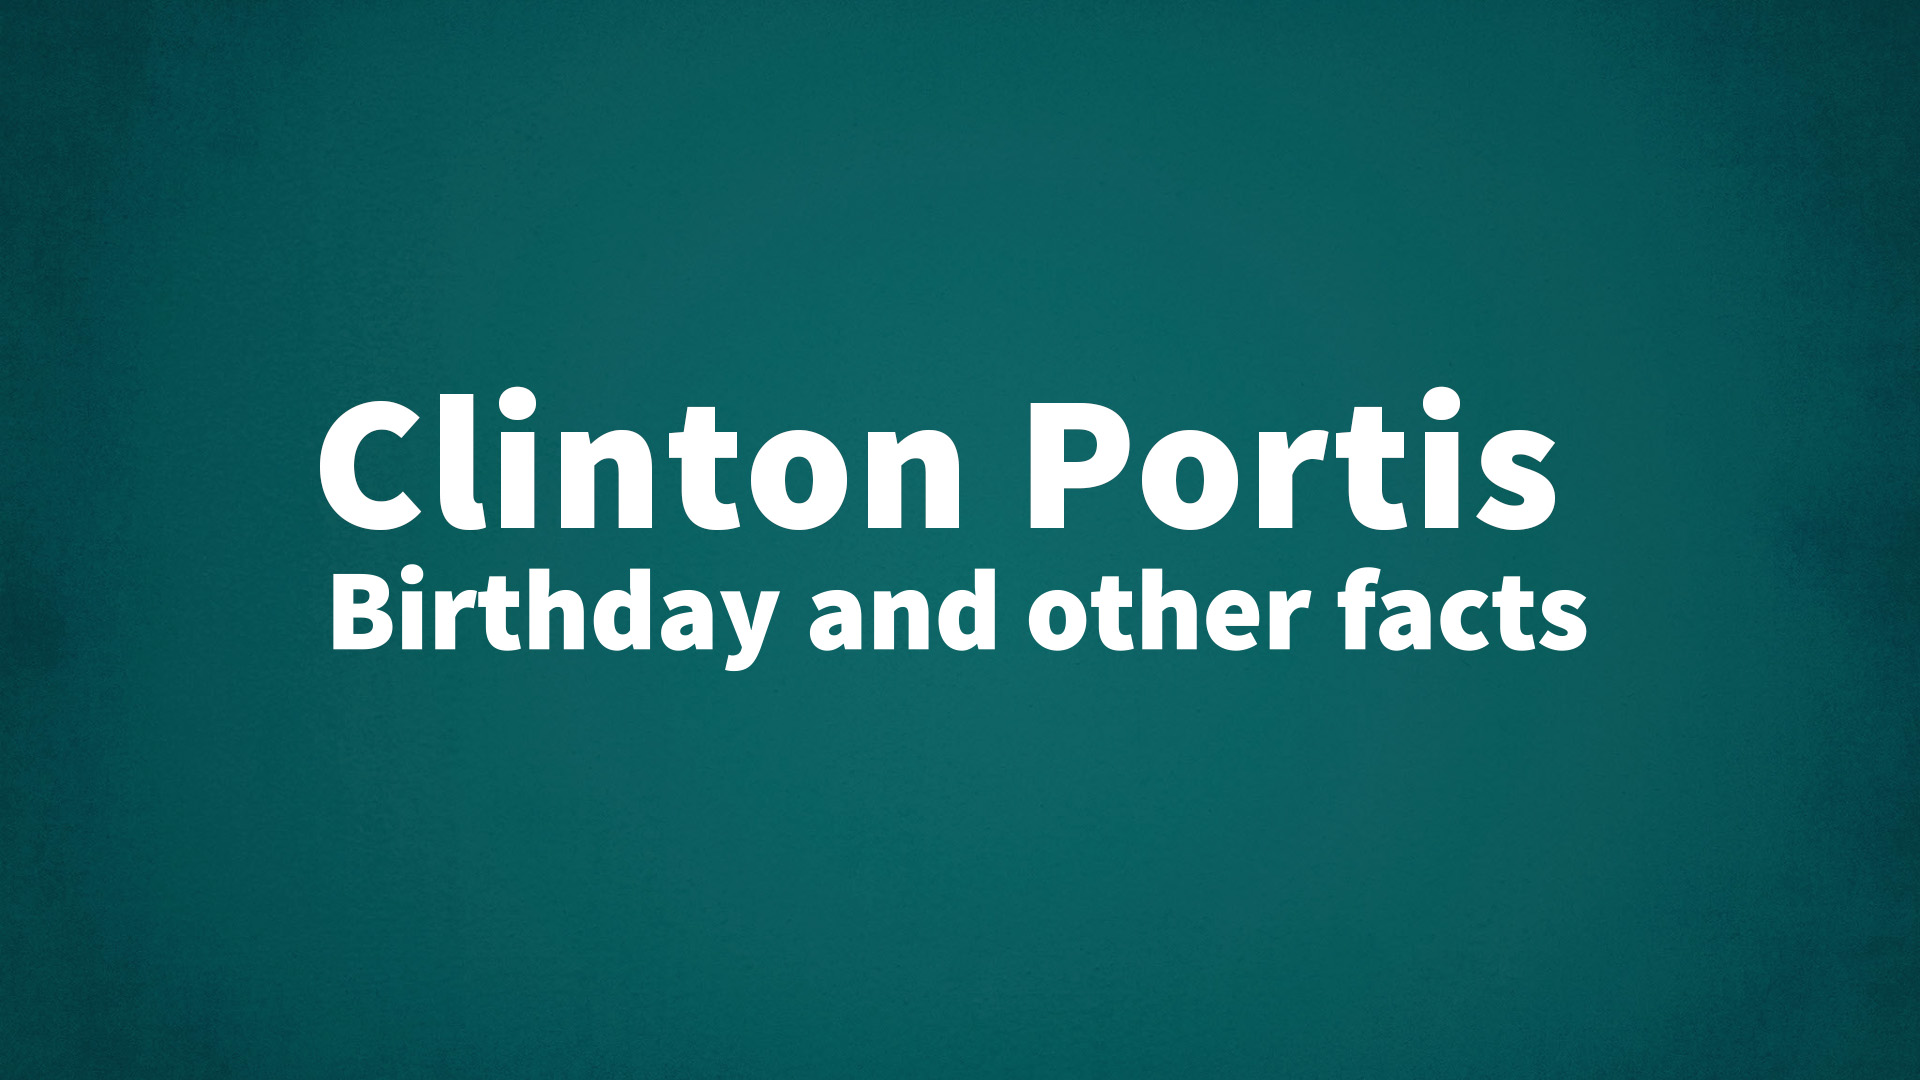 title image for Clinton Portis birthday